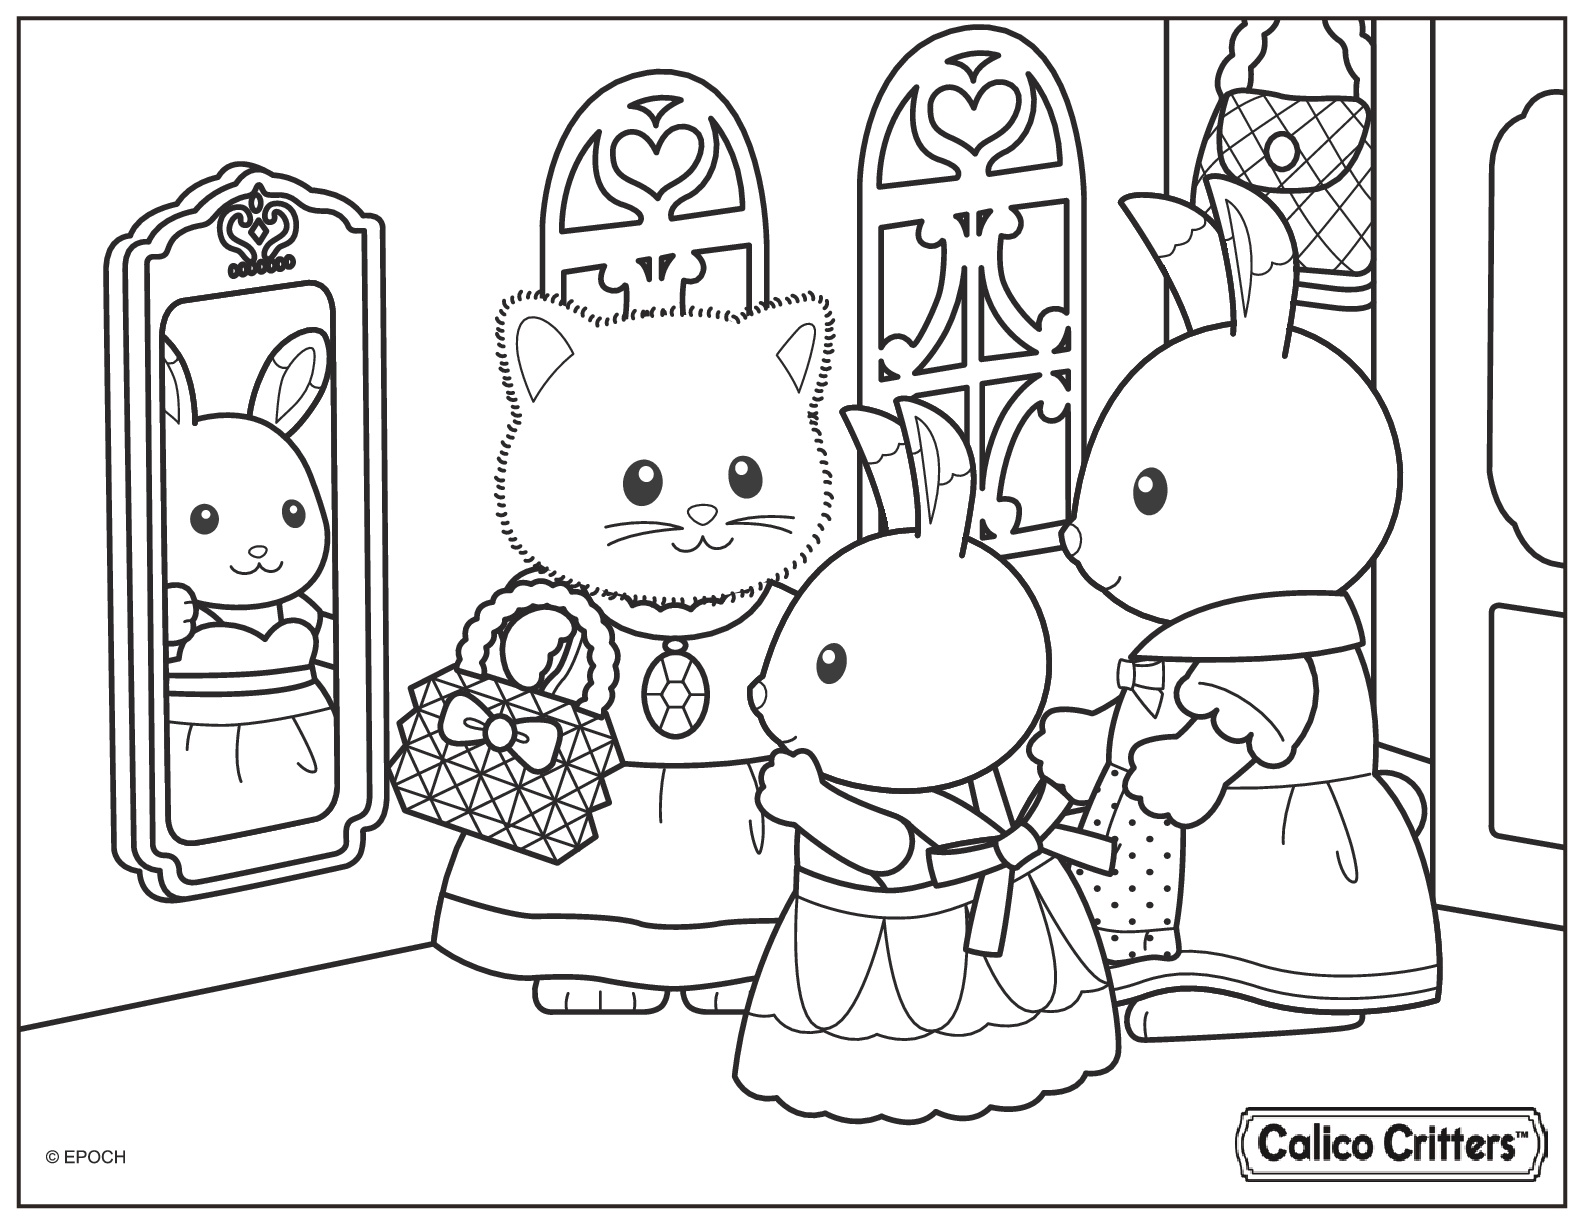 Calico Critters Getting Ready For The Church